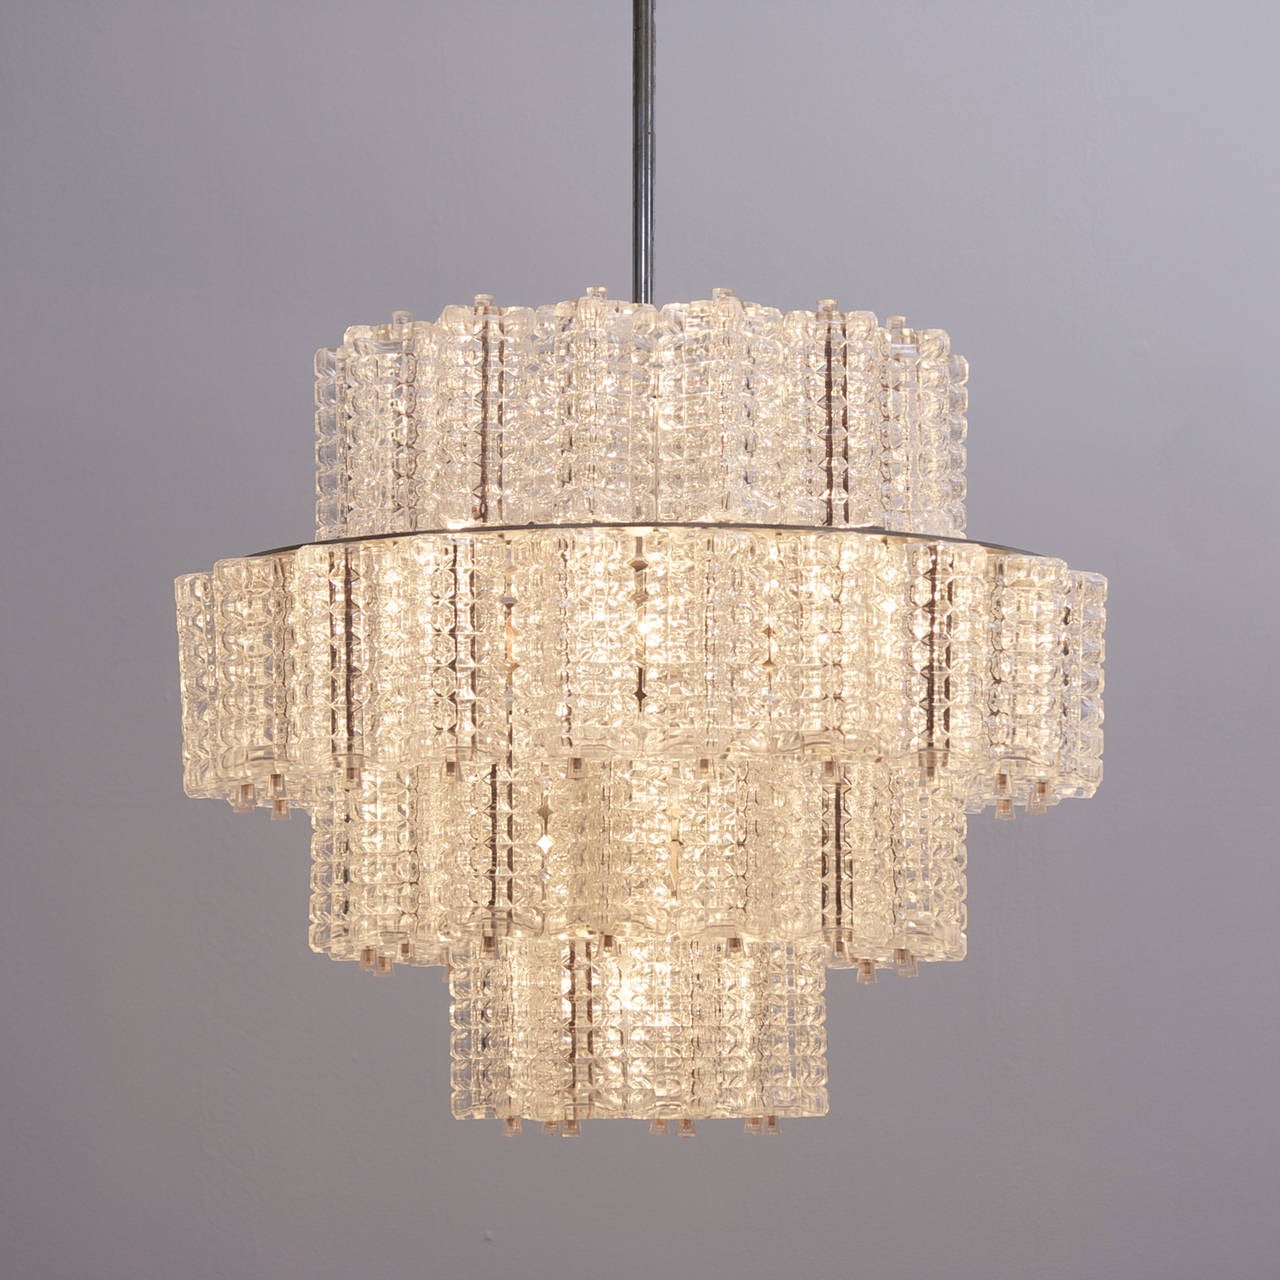 Wonderful and rare glass chandeliers by Austrian high end manufacturer Austrolux. The chandeliers are a high quality production from the 1960s. The light shines through the structured glasses and creates a cozy atmosphere in every room. The